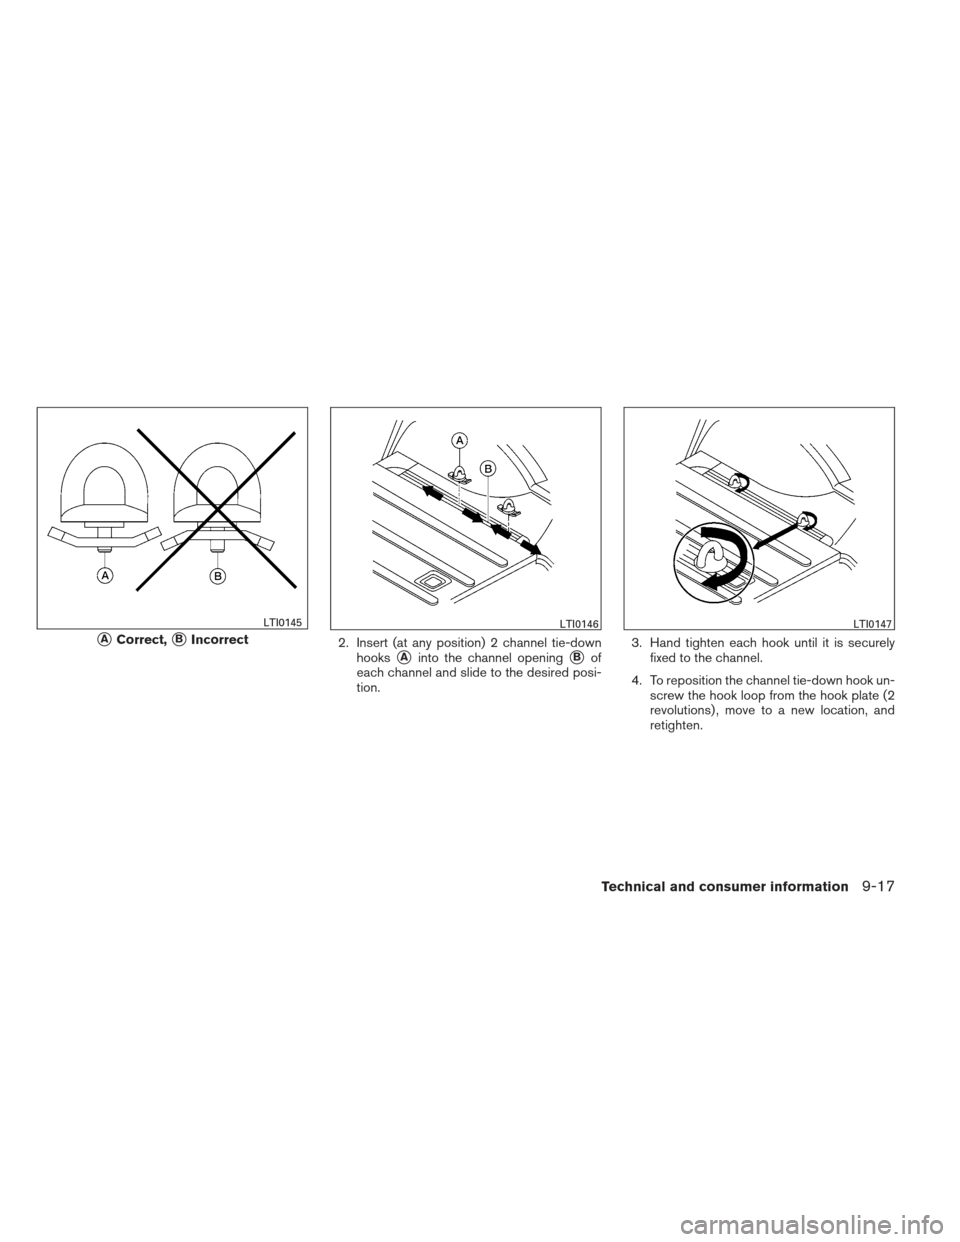 NISSAN XTERRA 2013 N50 / 2.G Owners Manual 2. Insert (at any position) 2 channel tie-downhooks
Ainto the channel openingBof
each channel and slide to the desired posi-
tion. 3. Hand tighten each hook until it is securely
fixed to the channel